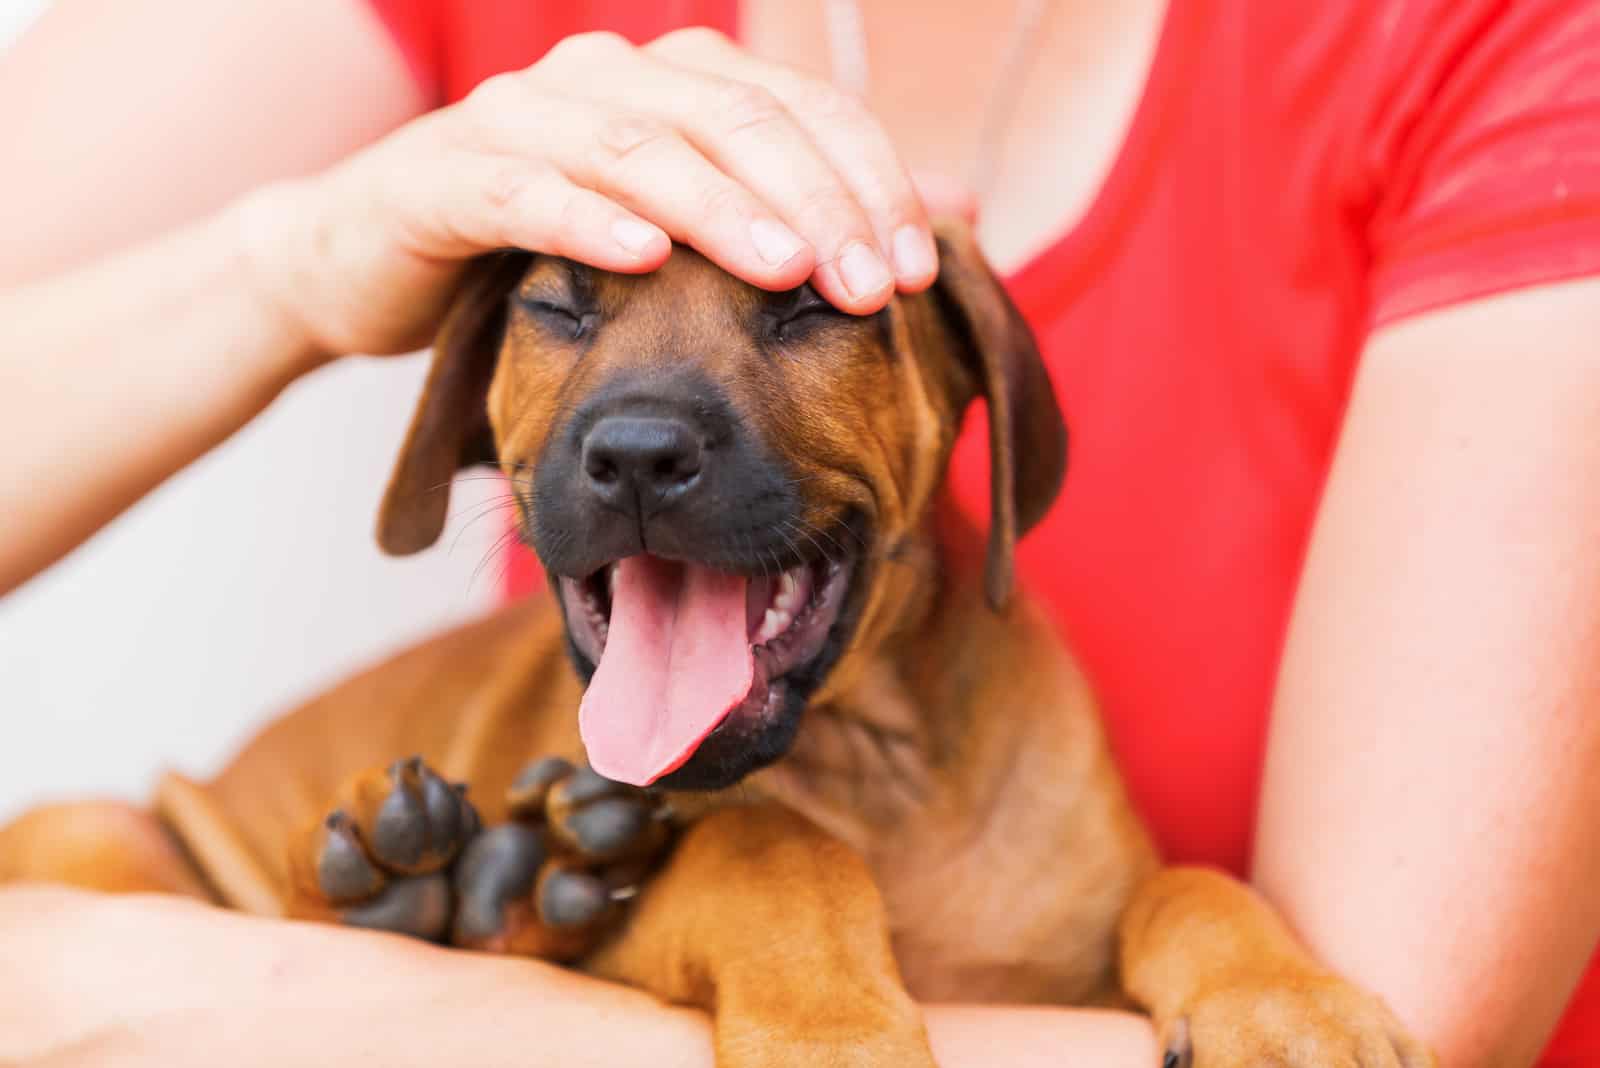 My Dog’s Head Is Hot: 4 Common Causes & How To Help